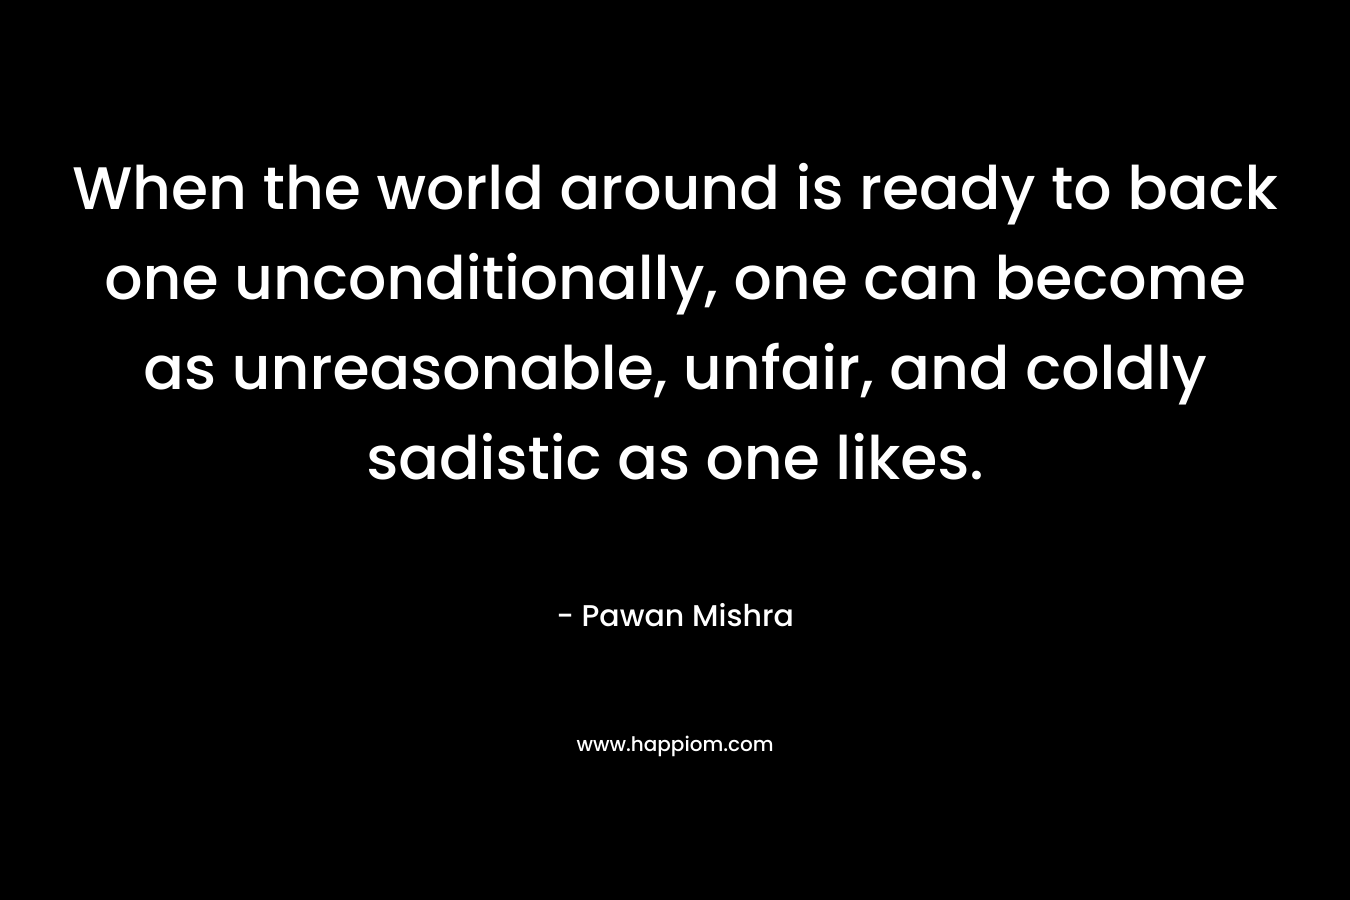 When the world around is ready to back one unconditionally, one can become as unreasonable, unfair, and coldly sadistic as one likes. – Pawan Mishra